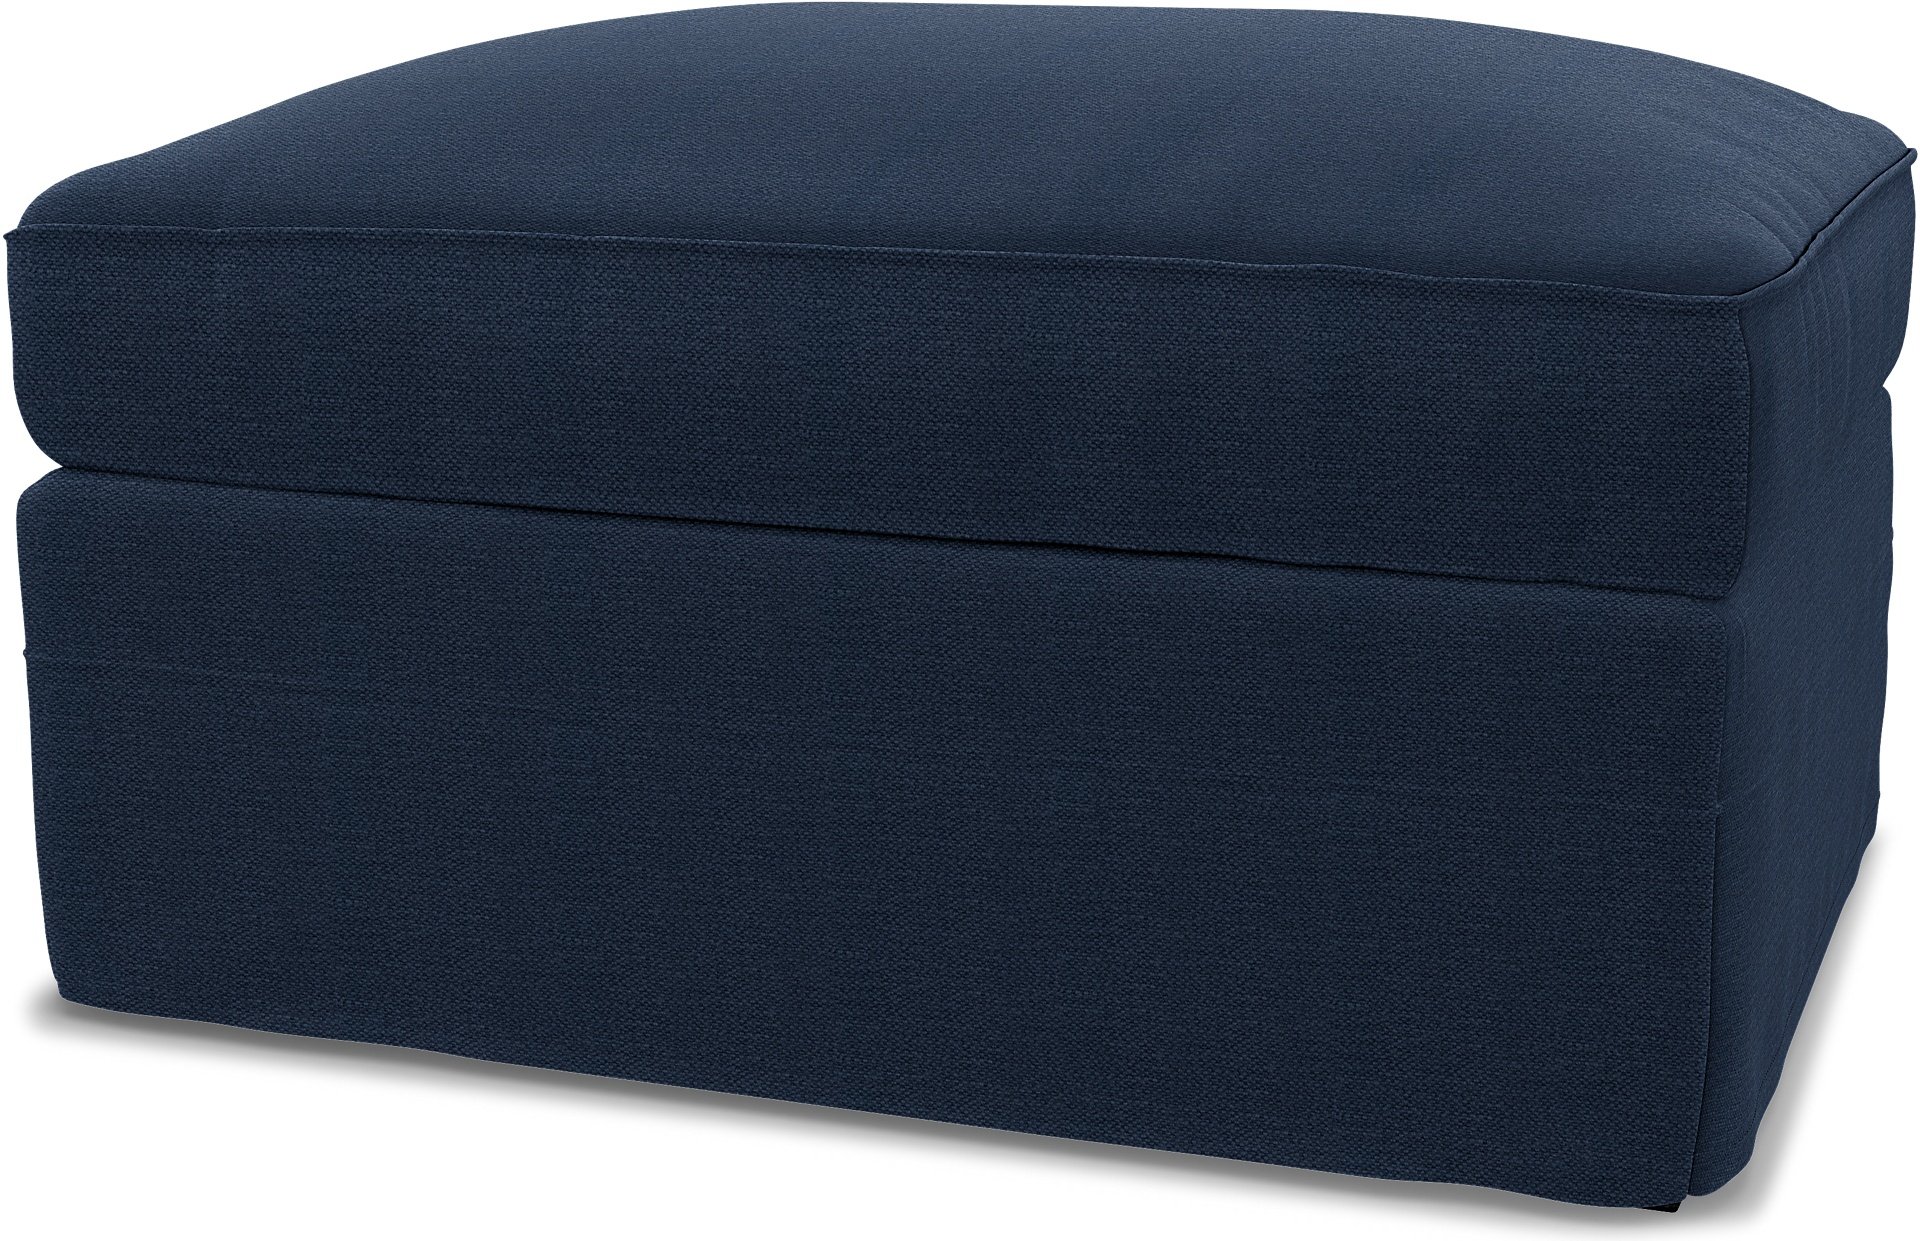 IKEA - Gronlid Footstool with Storage Cover, Navy Blue, Linen - Bemz